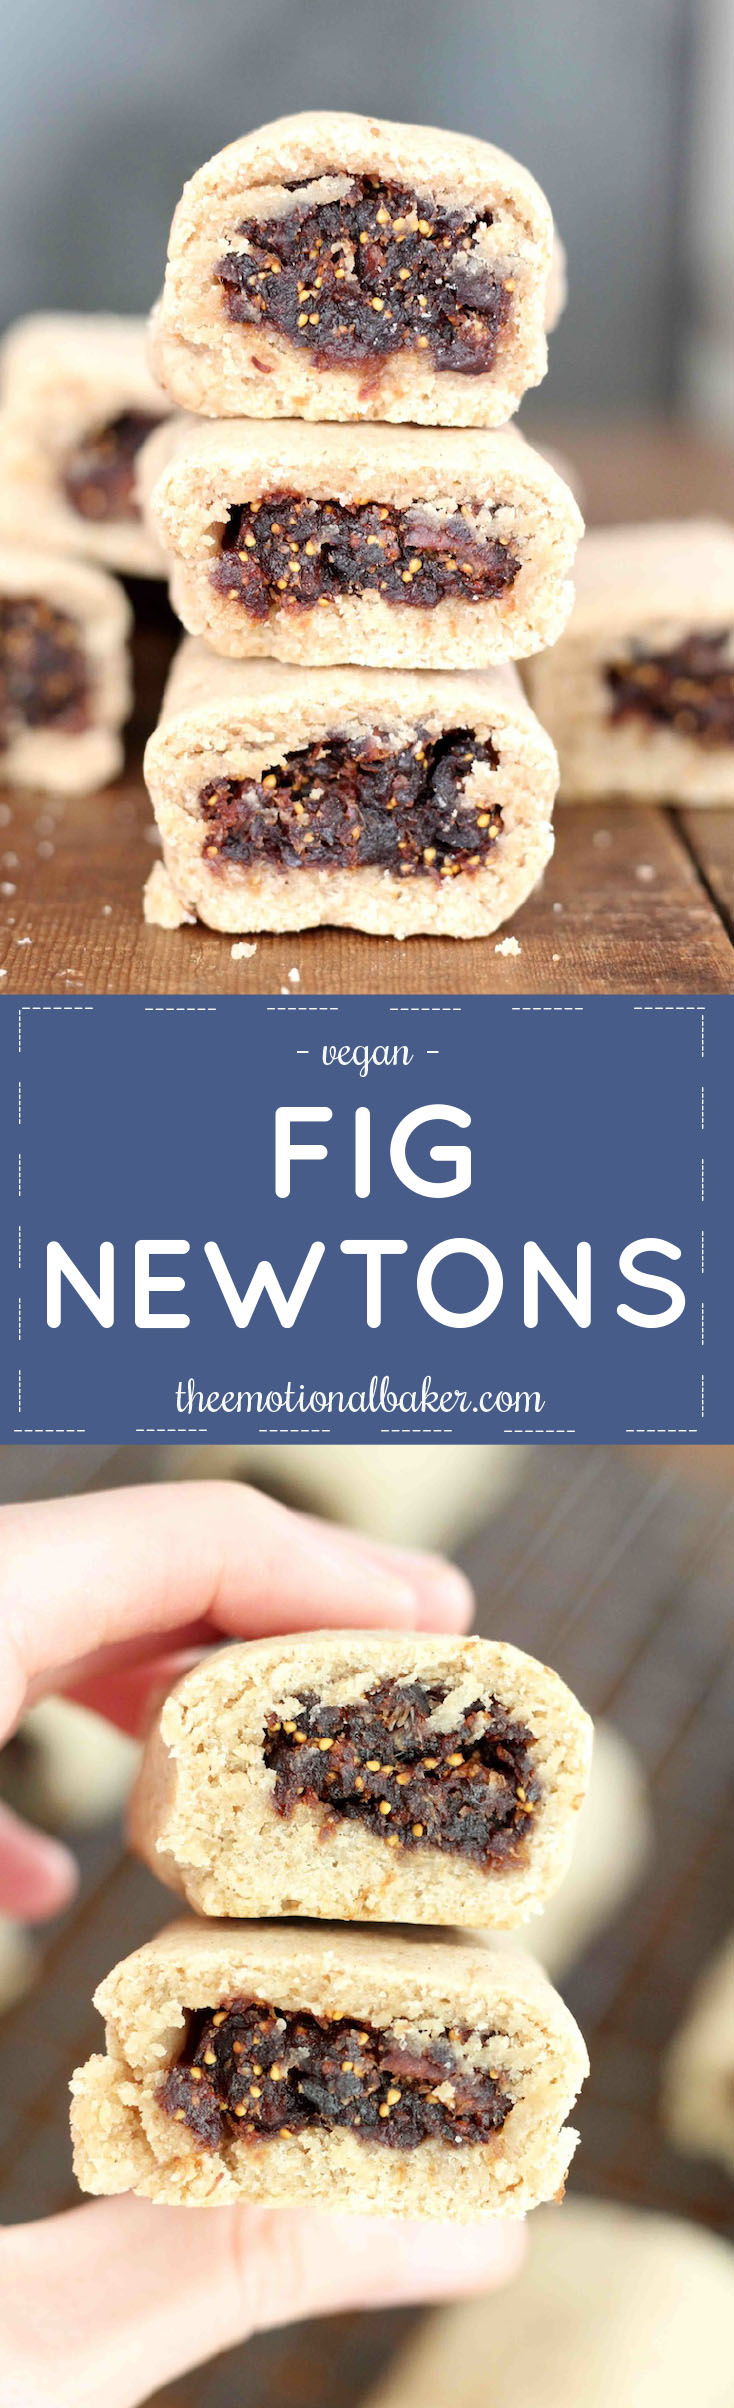 Homemade is always better! The same is true for these scratch made Fig Newtons!